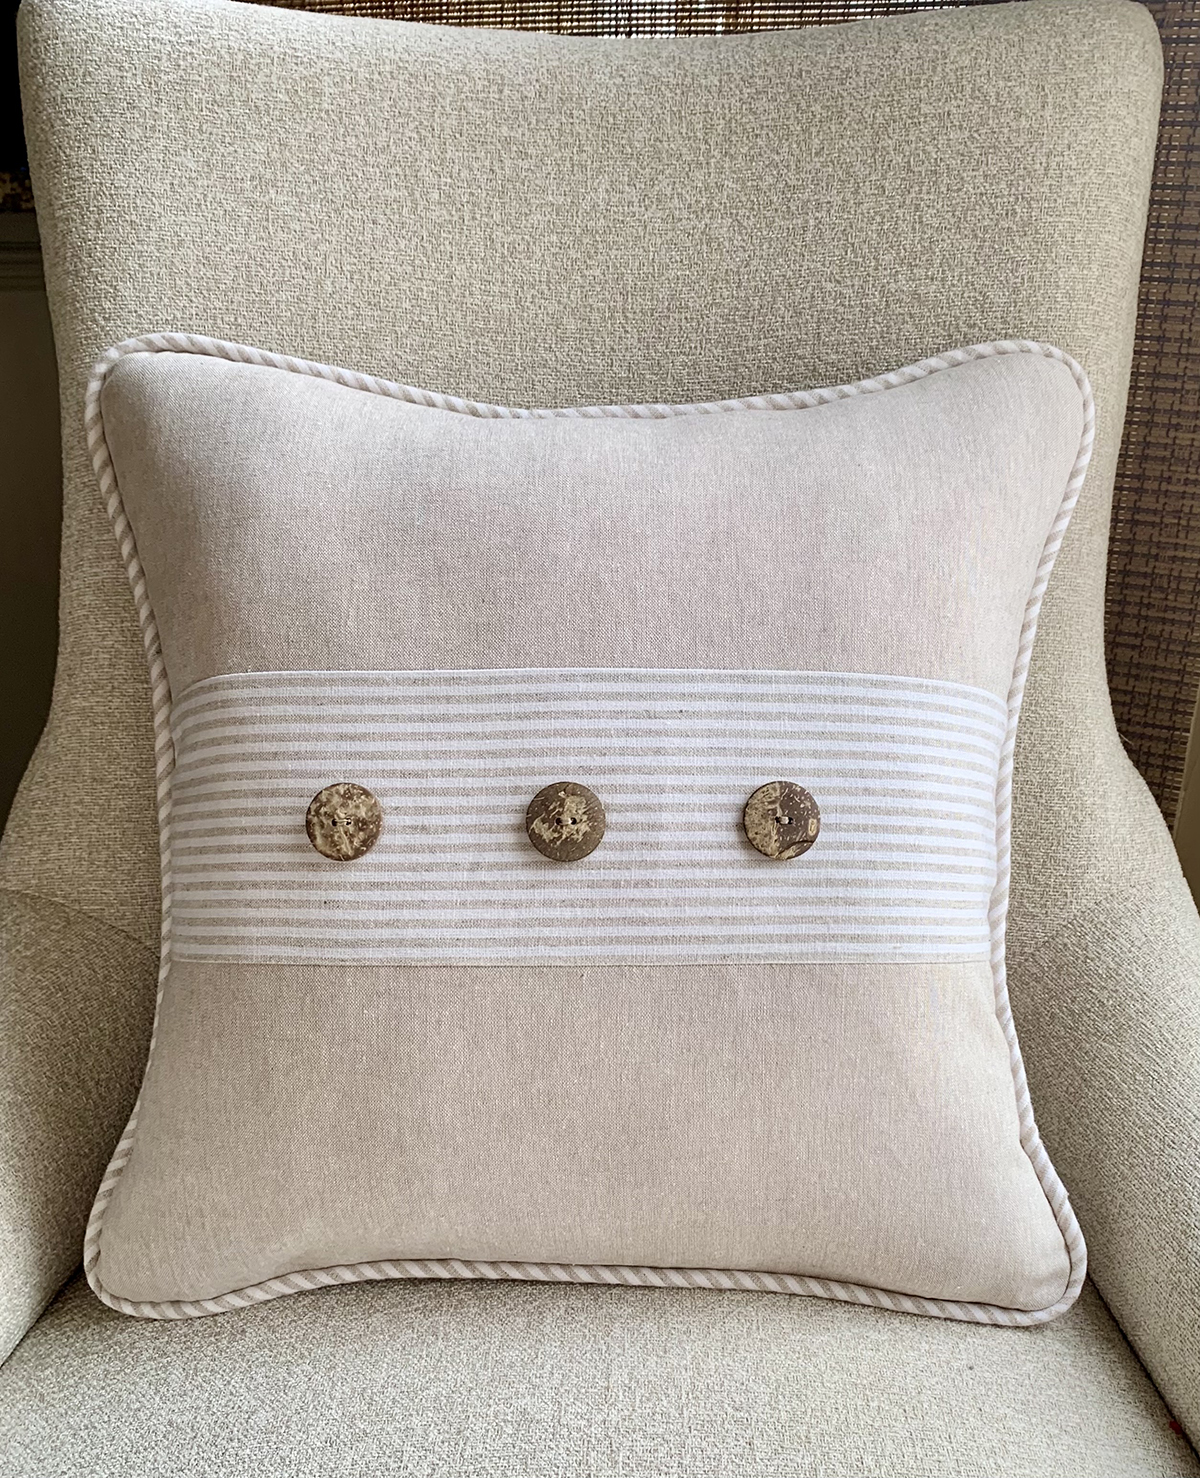 How to Sew a Professional Looking Piped & Zippered Pillow Cover 